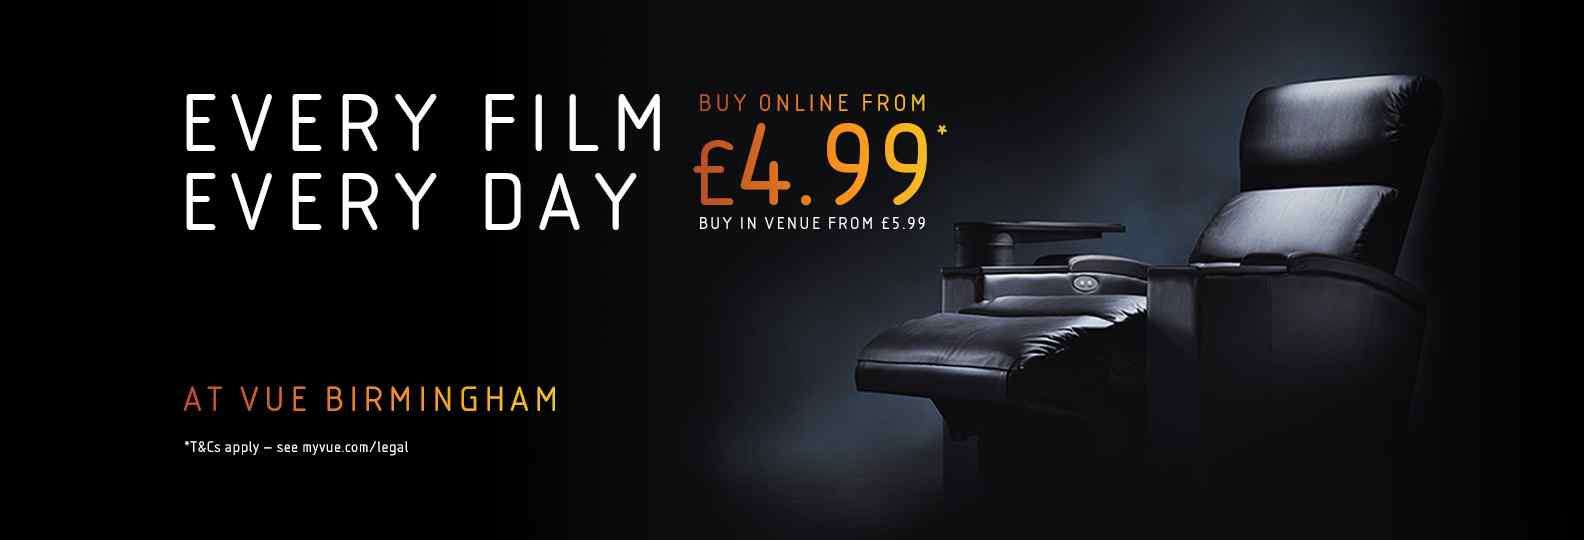 Vue Birmingham | Every Film, Every Day from £4.99